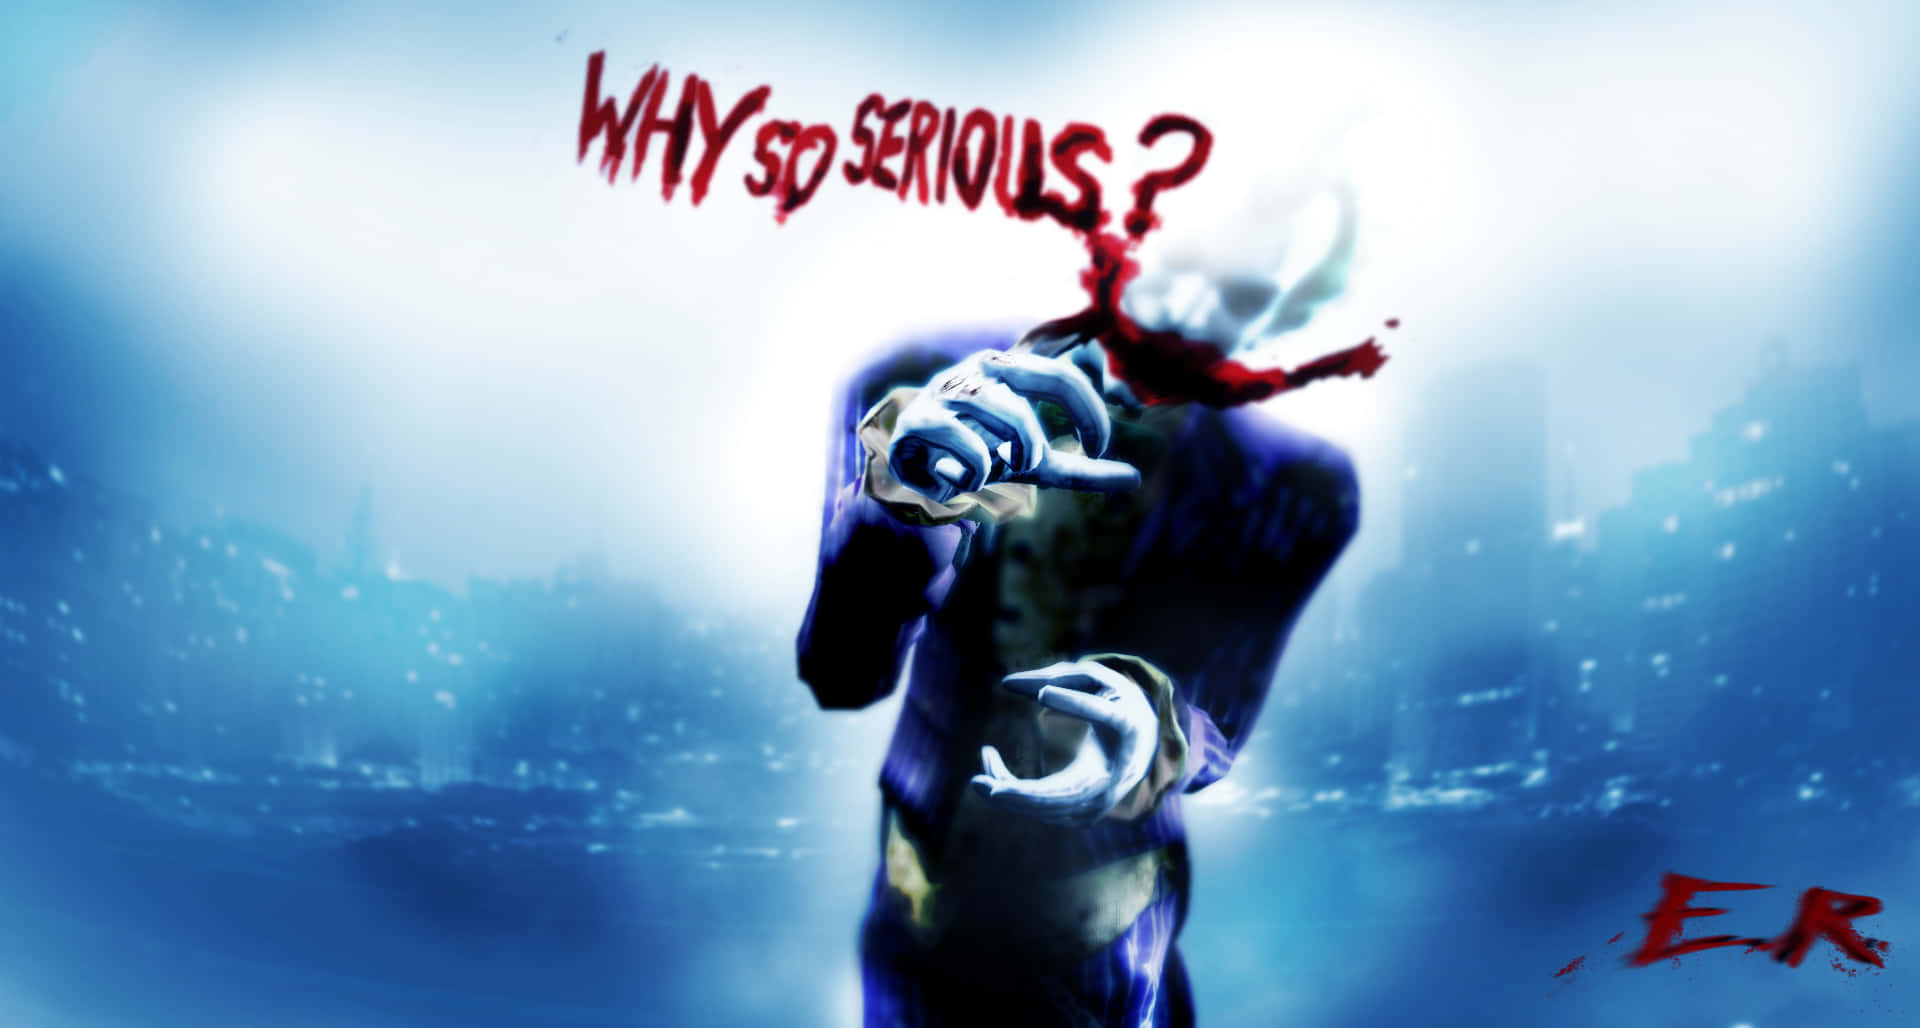 Scary Joker Writing Why So Serious Wallpaper